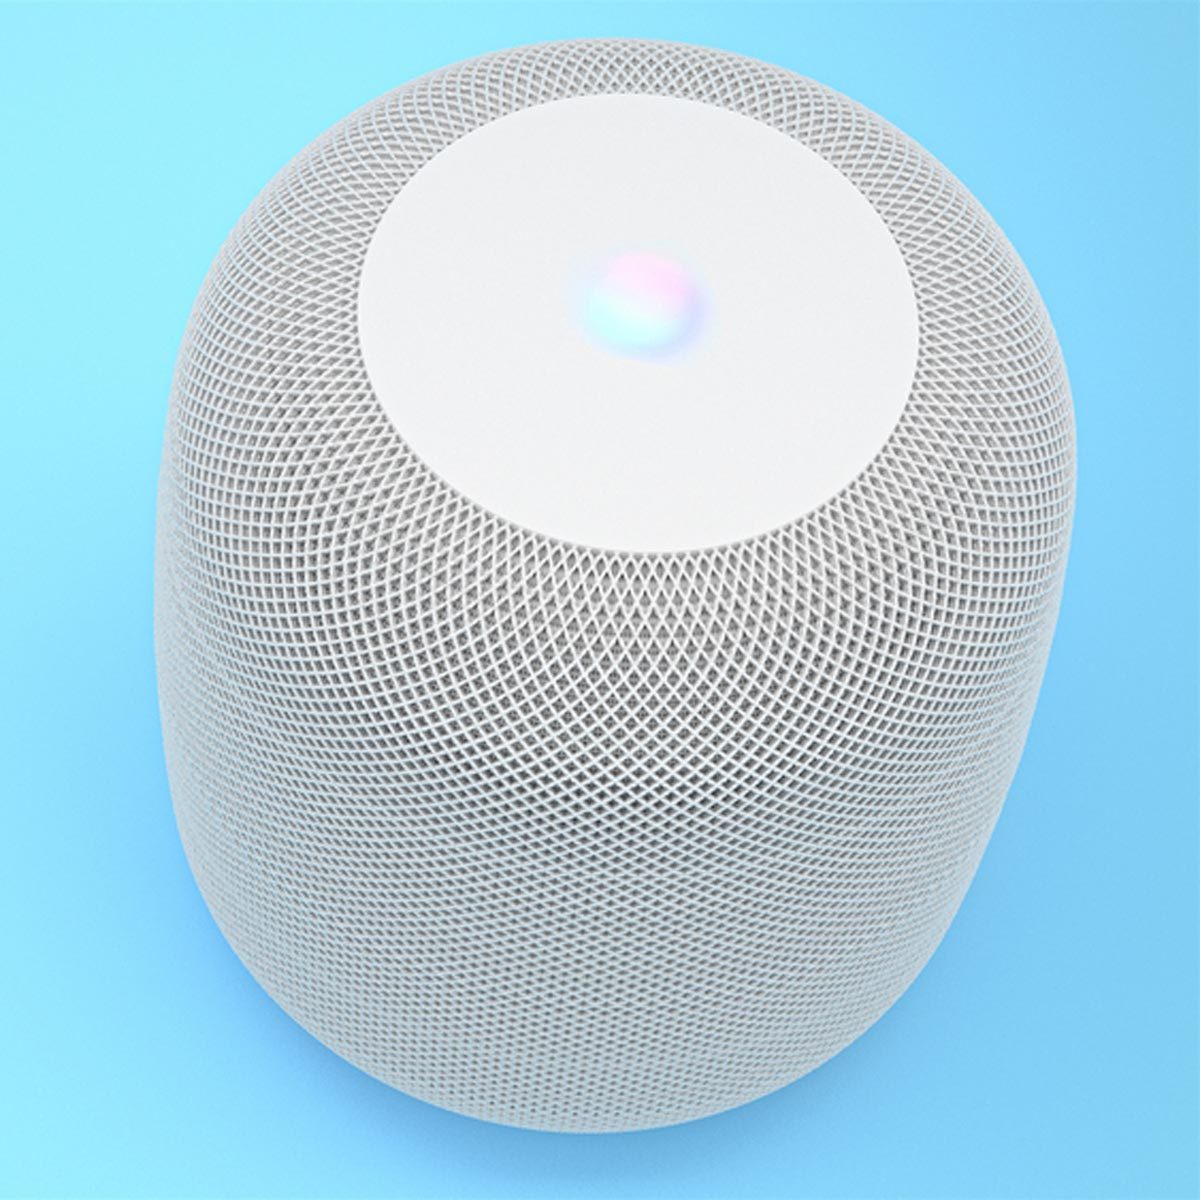 10 Things to Know About the Apple HomePod — The Family Handyman